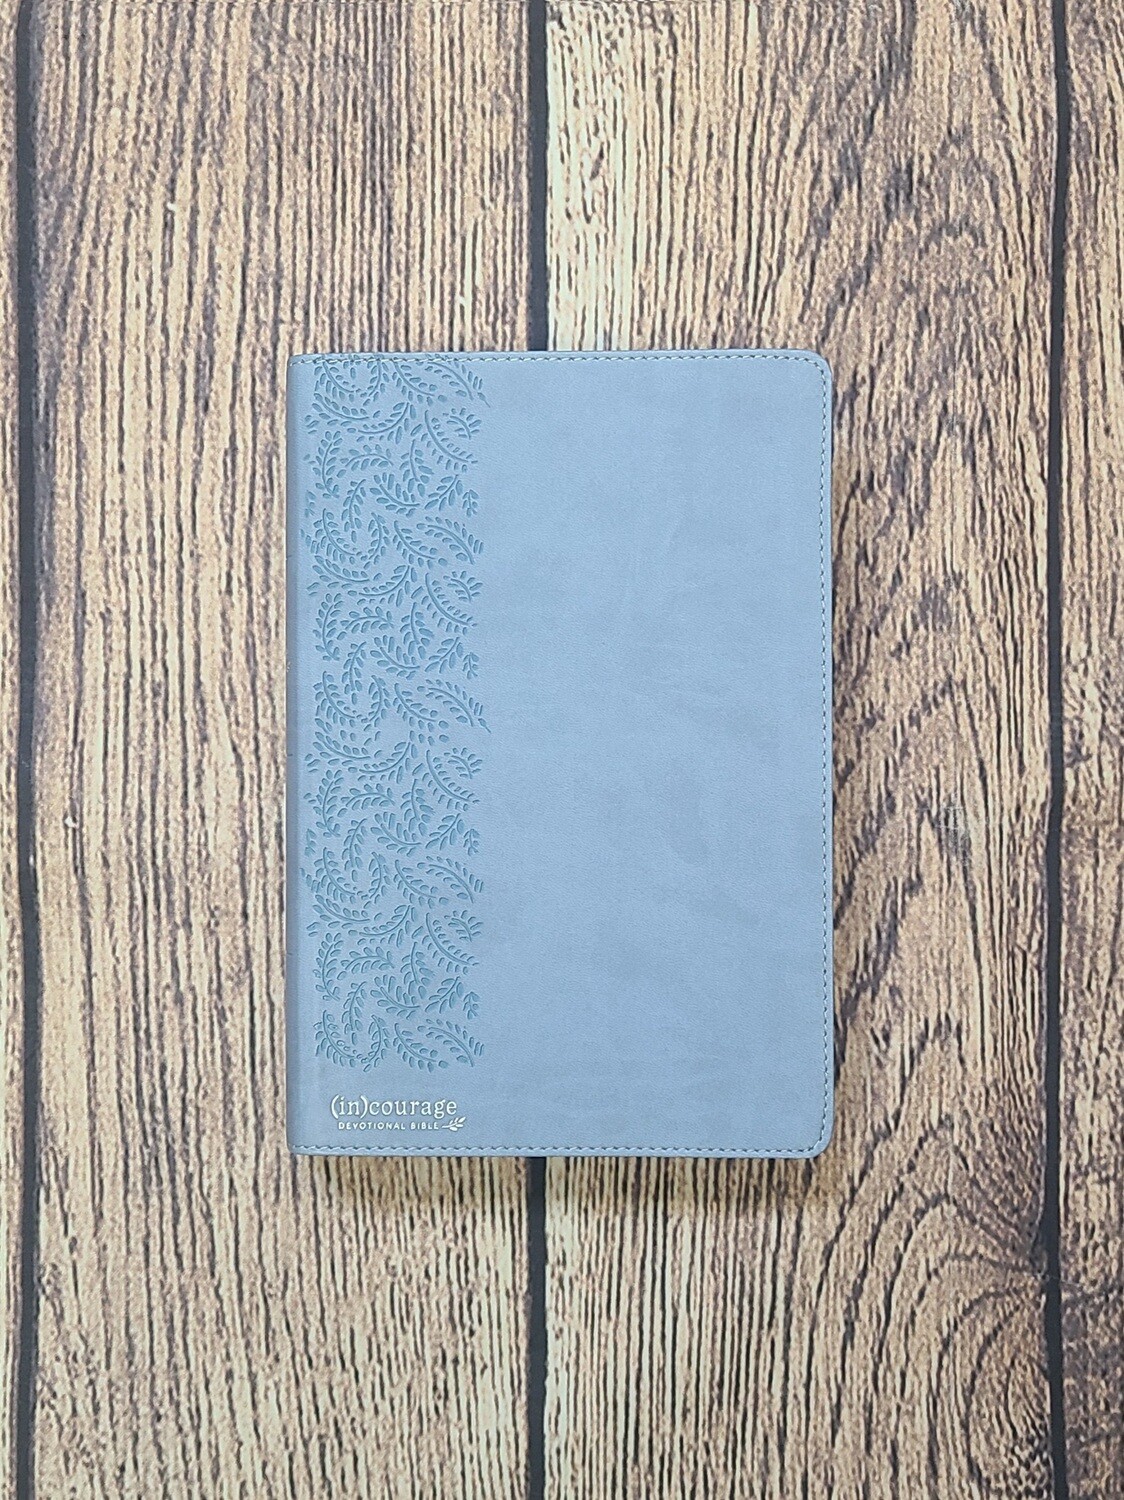 CSB (In)Courage Devotional Bible - Blue Leathertouch